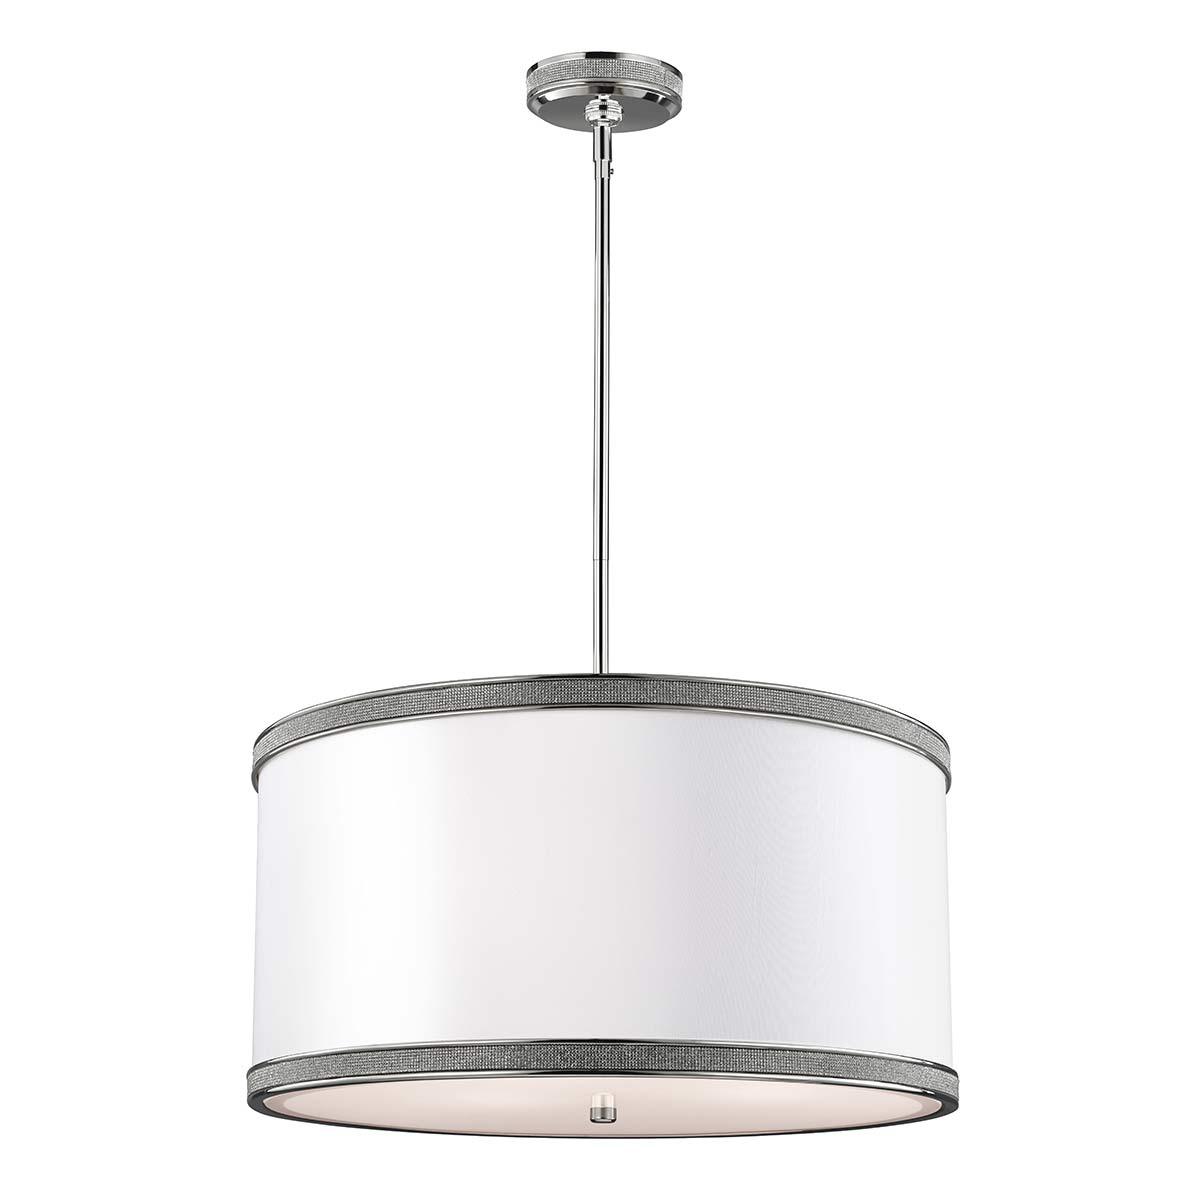 Elstead Lighting - FE-PAVE-P-M - Feiss Pendant from the Pave range. Pave 3 Light Pendant Product Code = FE-PAVE-P-M